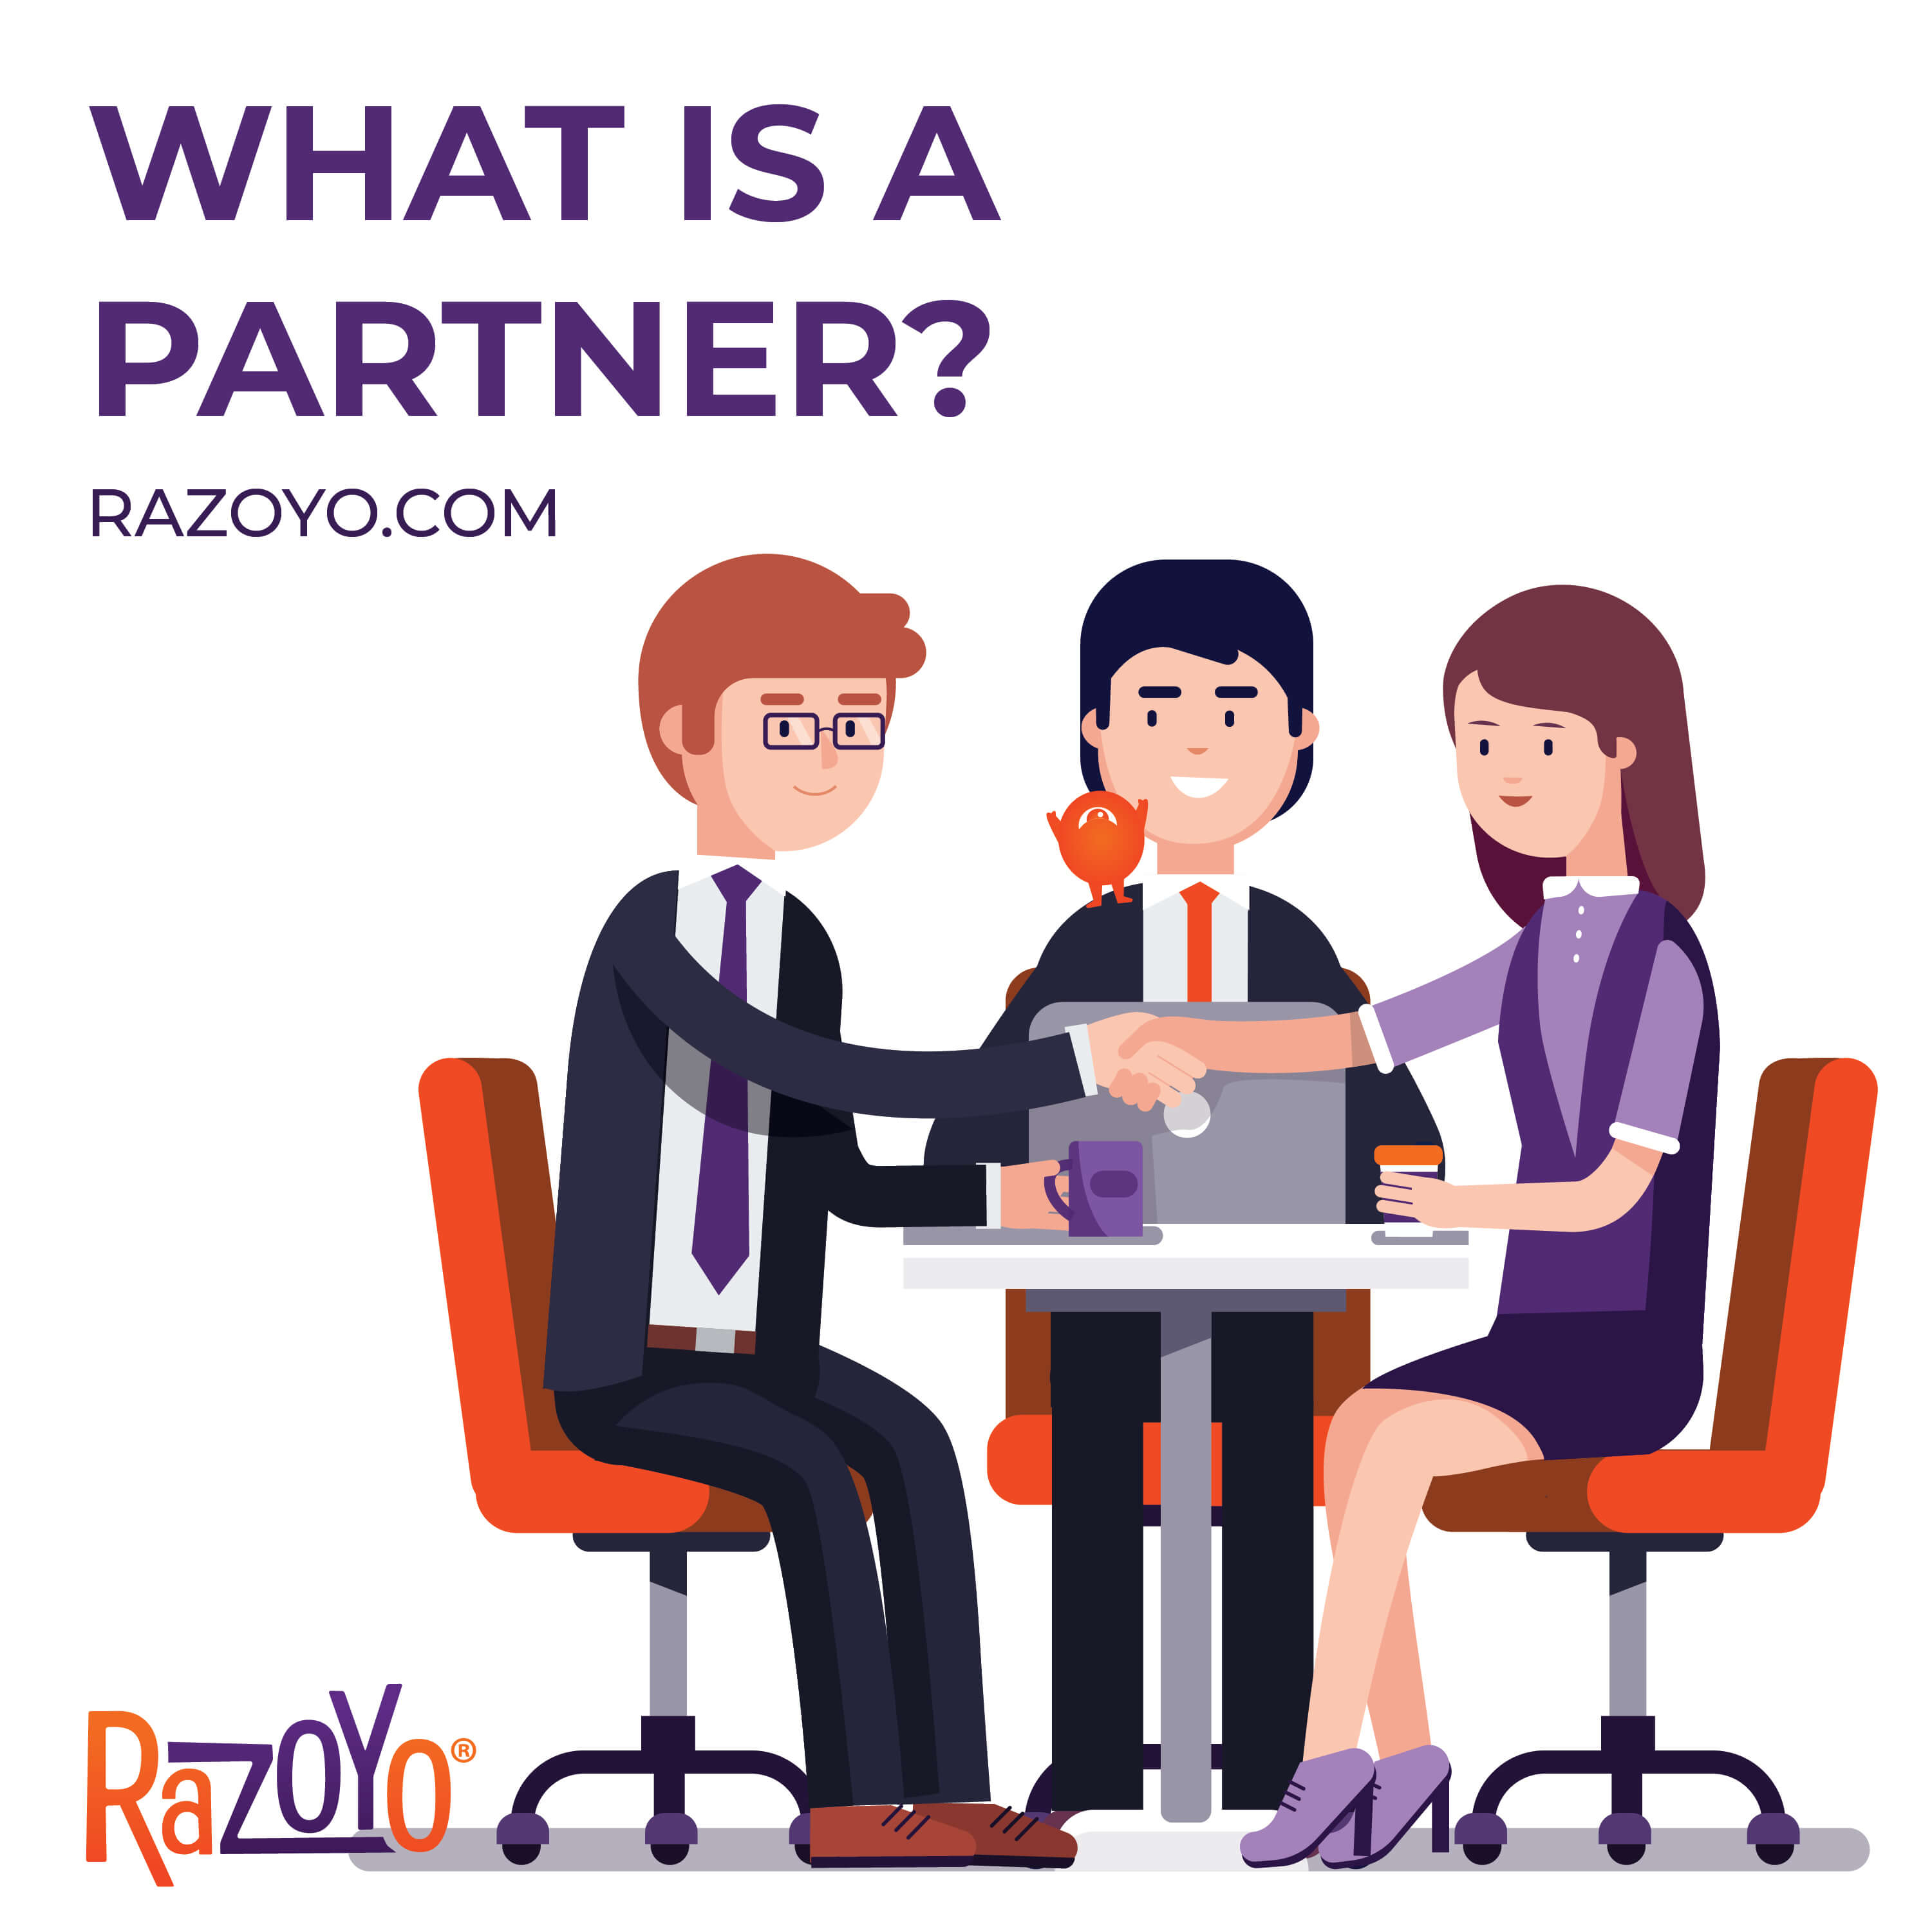 What is a partner?